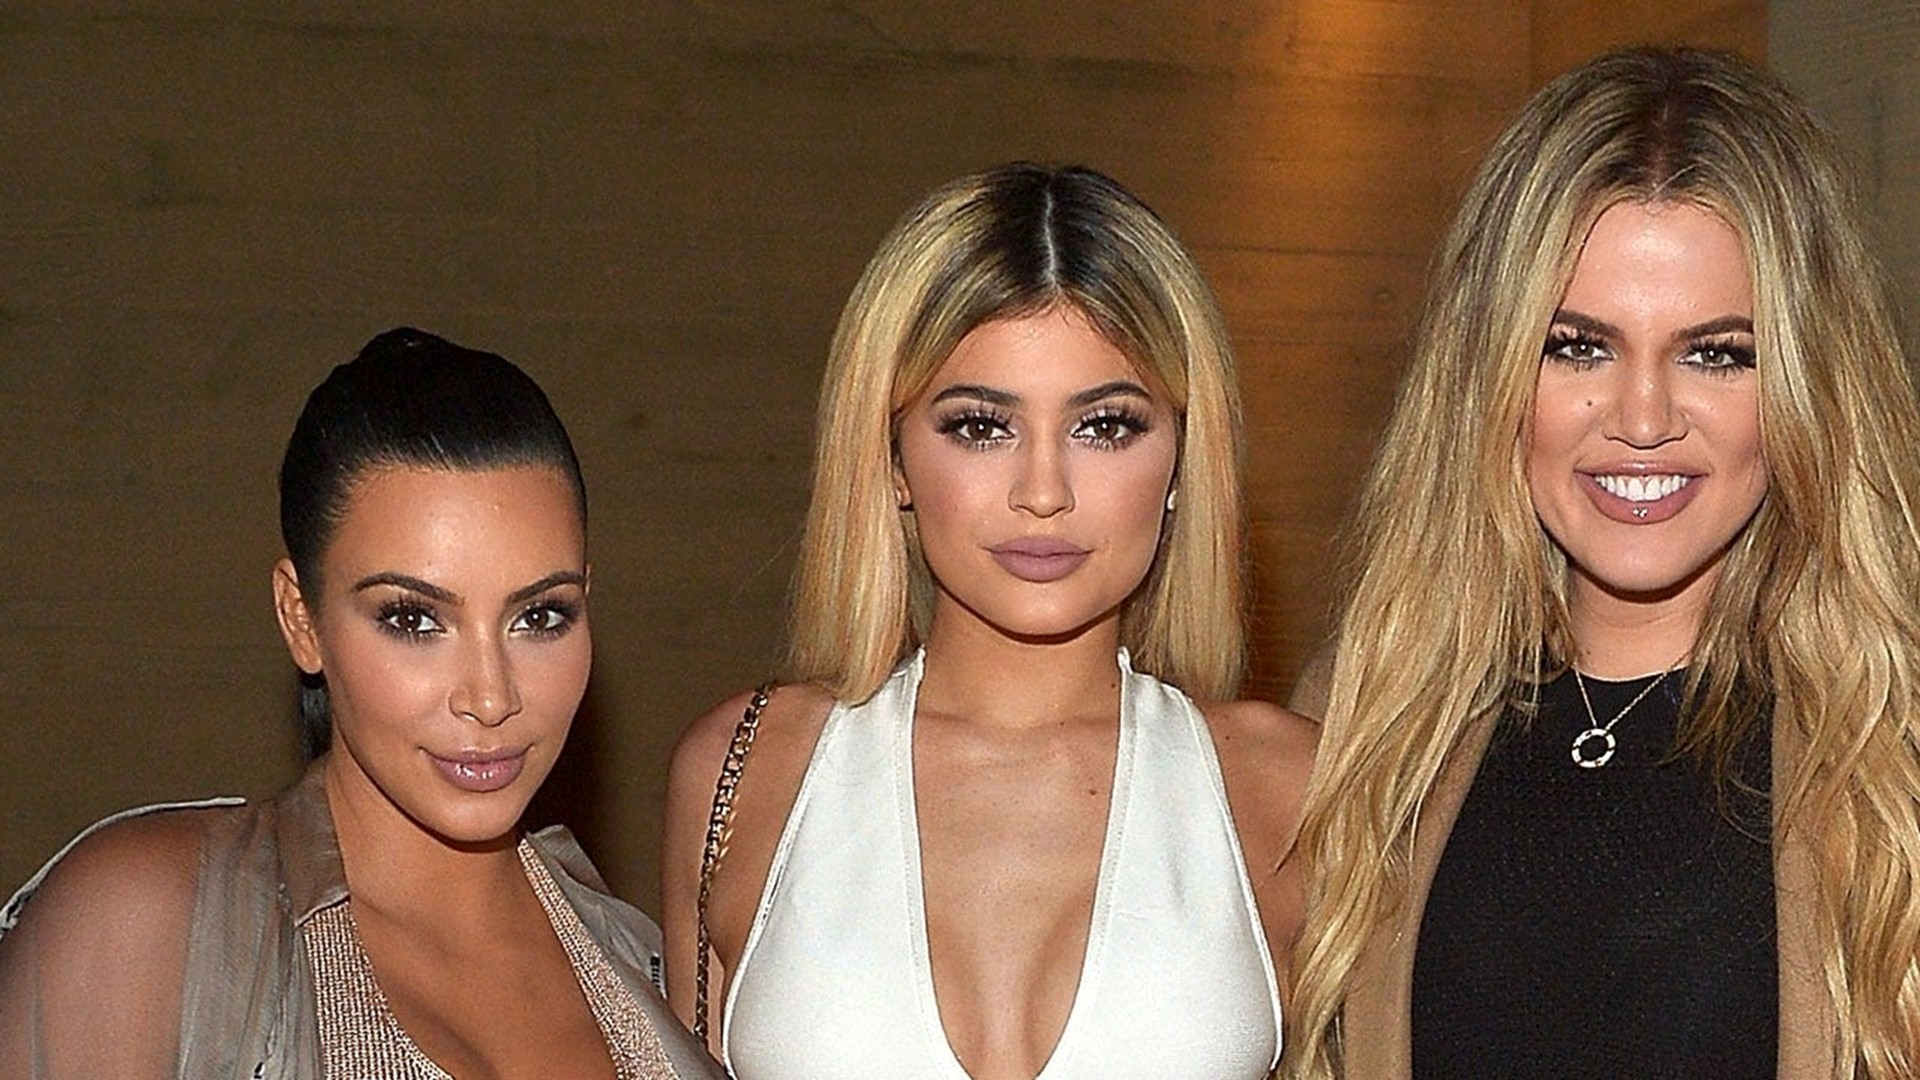 Khloe Kardashian Says She And Her Sisters Never Mom Shame Each Other